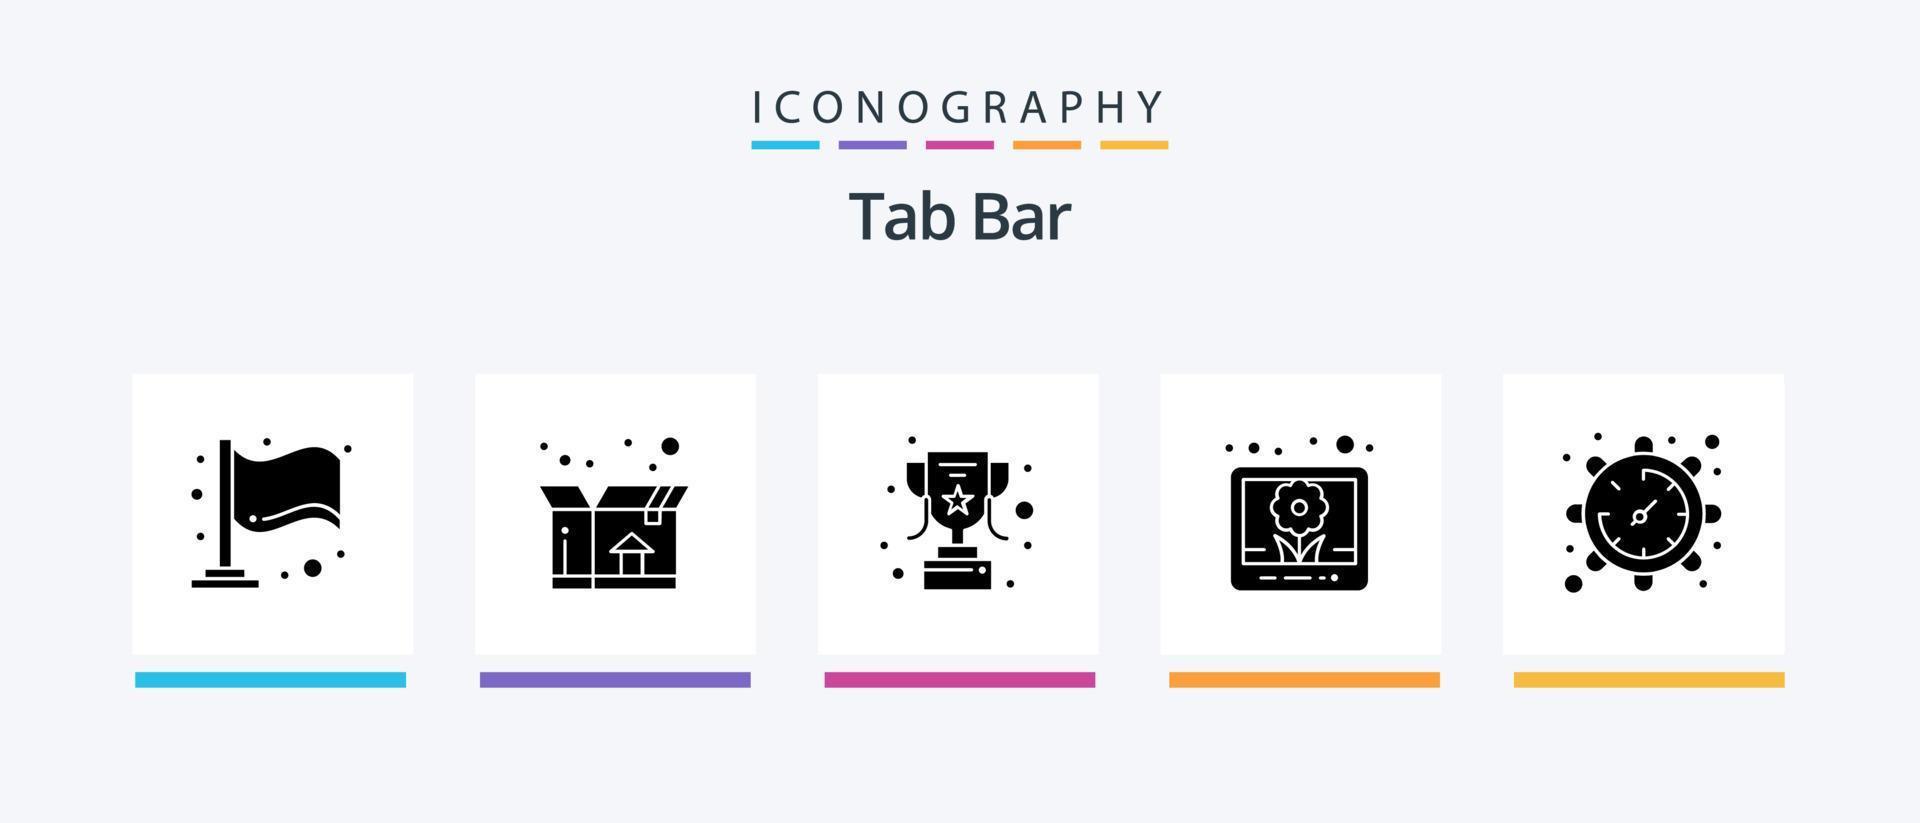 Tab Bar Glyph 5 Icon Pack Including . watch. trophy. time. gear. Creative Icons Design vector